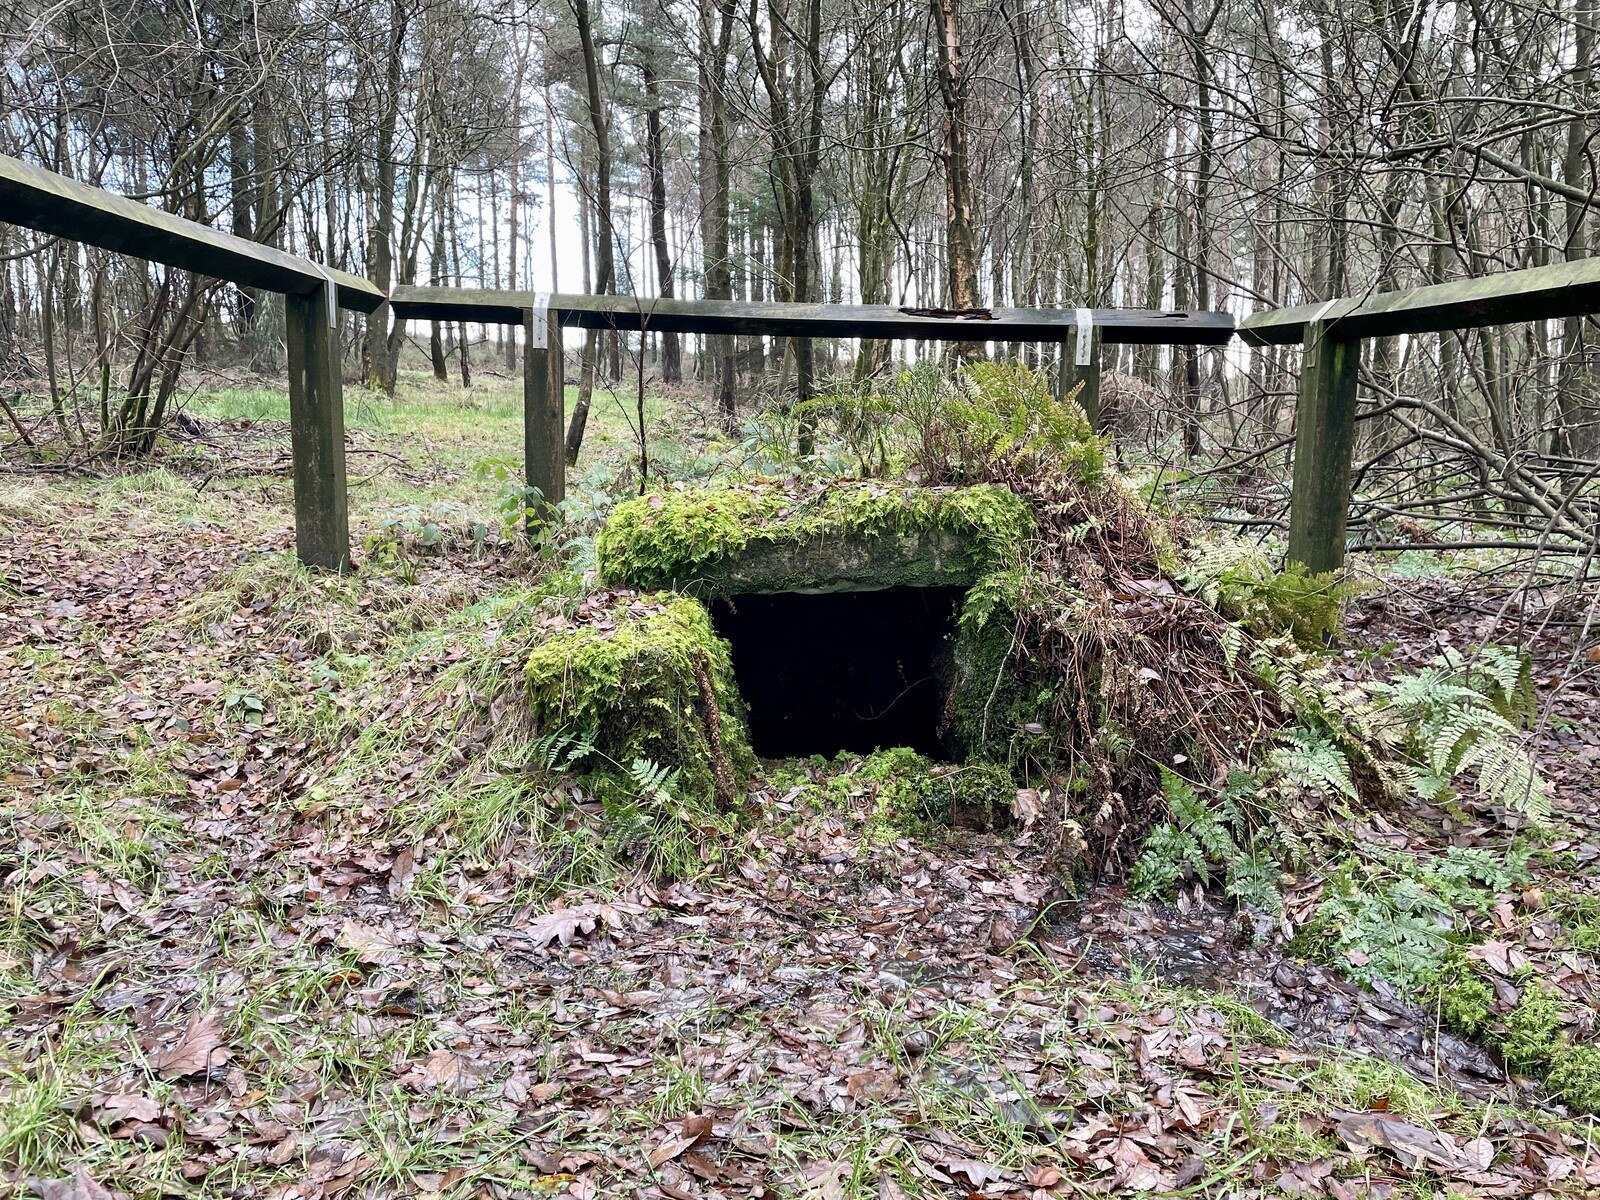 A closer-up view of the well, moss growing thick on the stones and lintel covering the spring